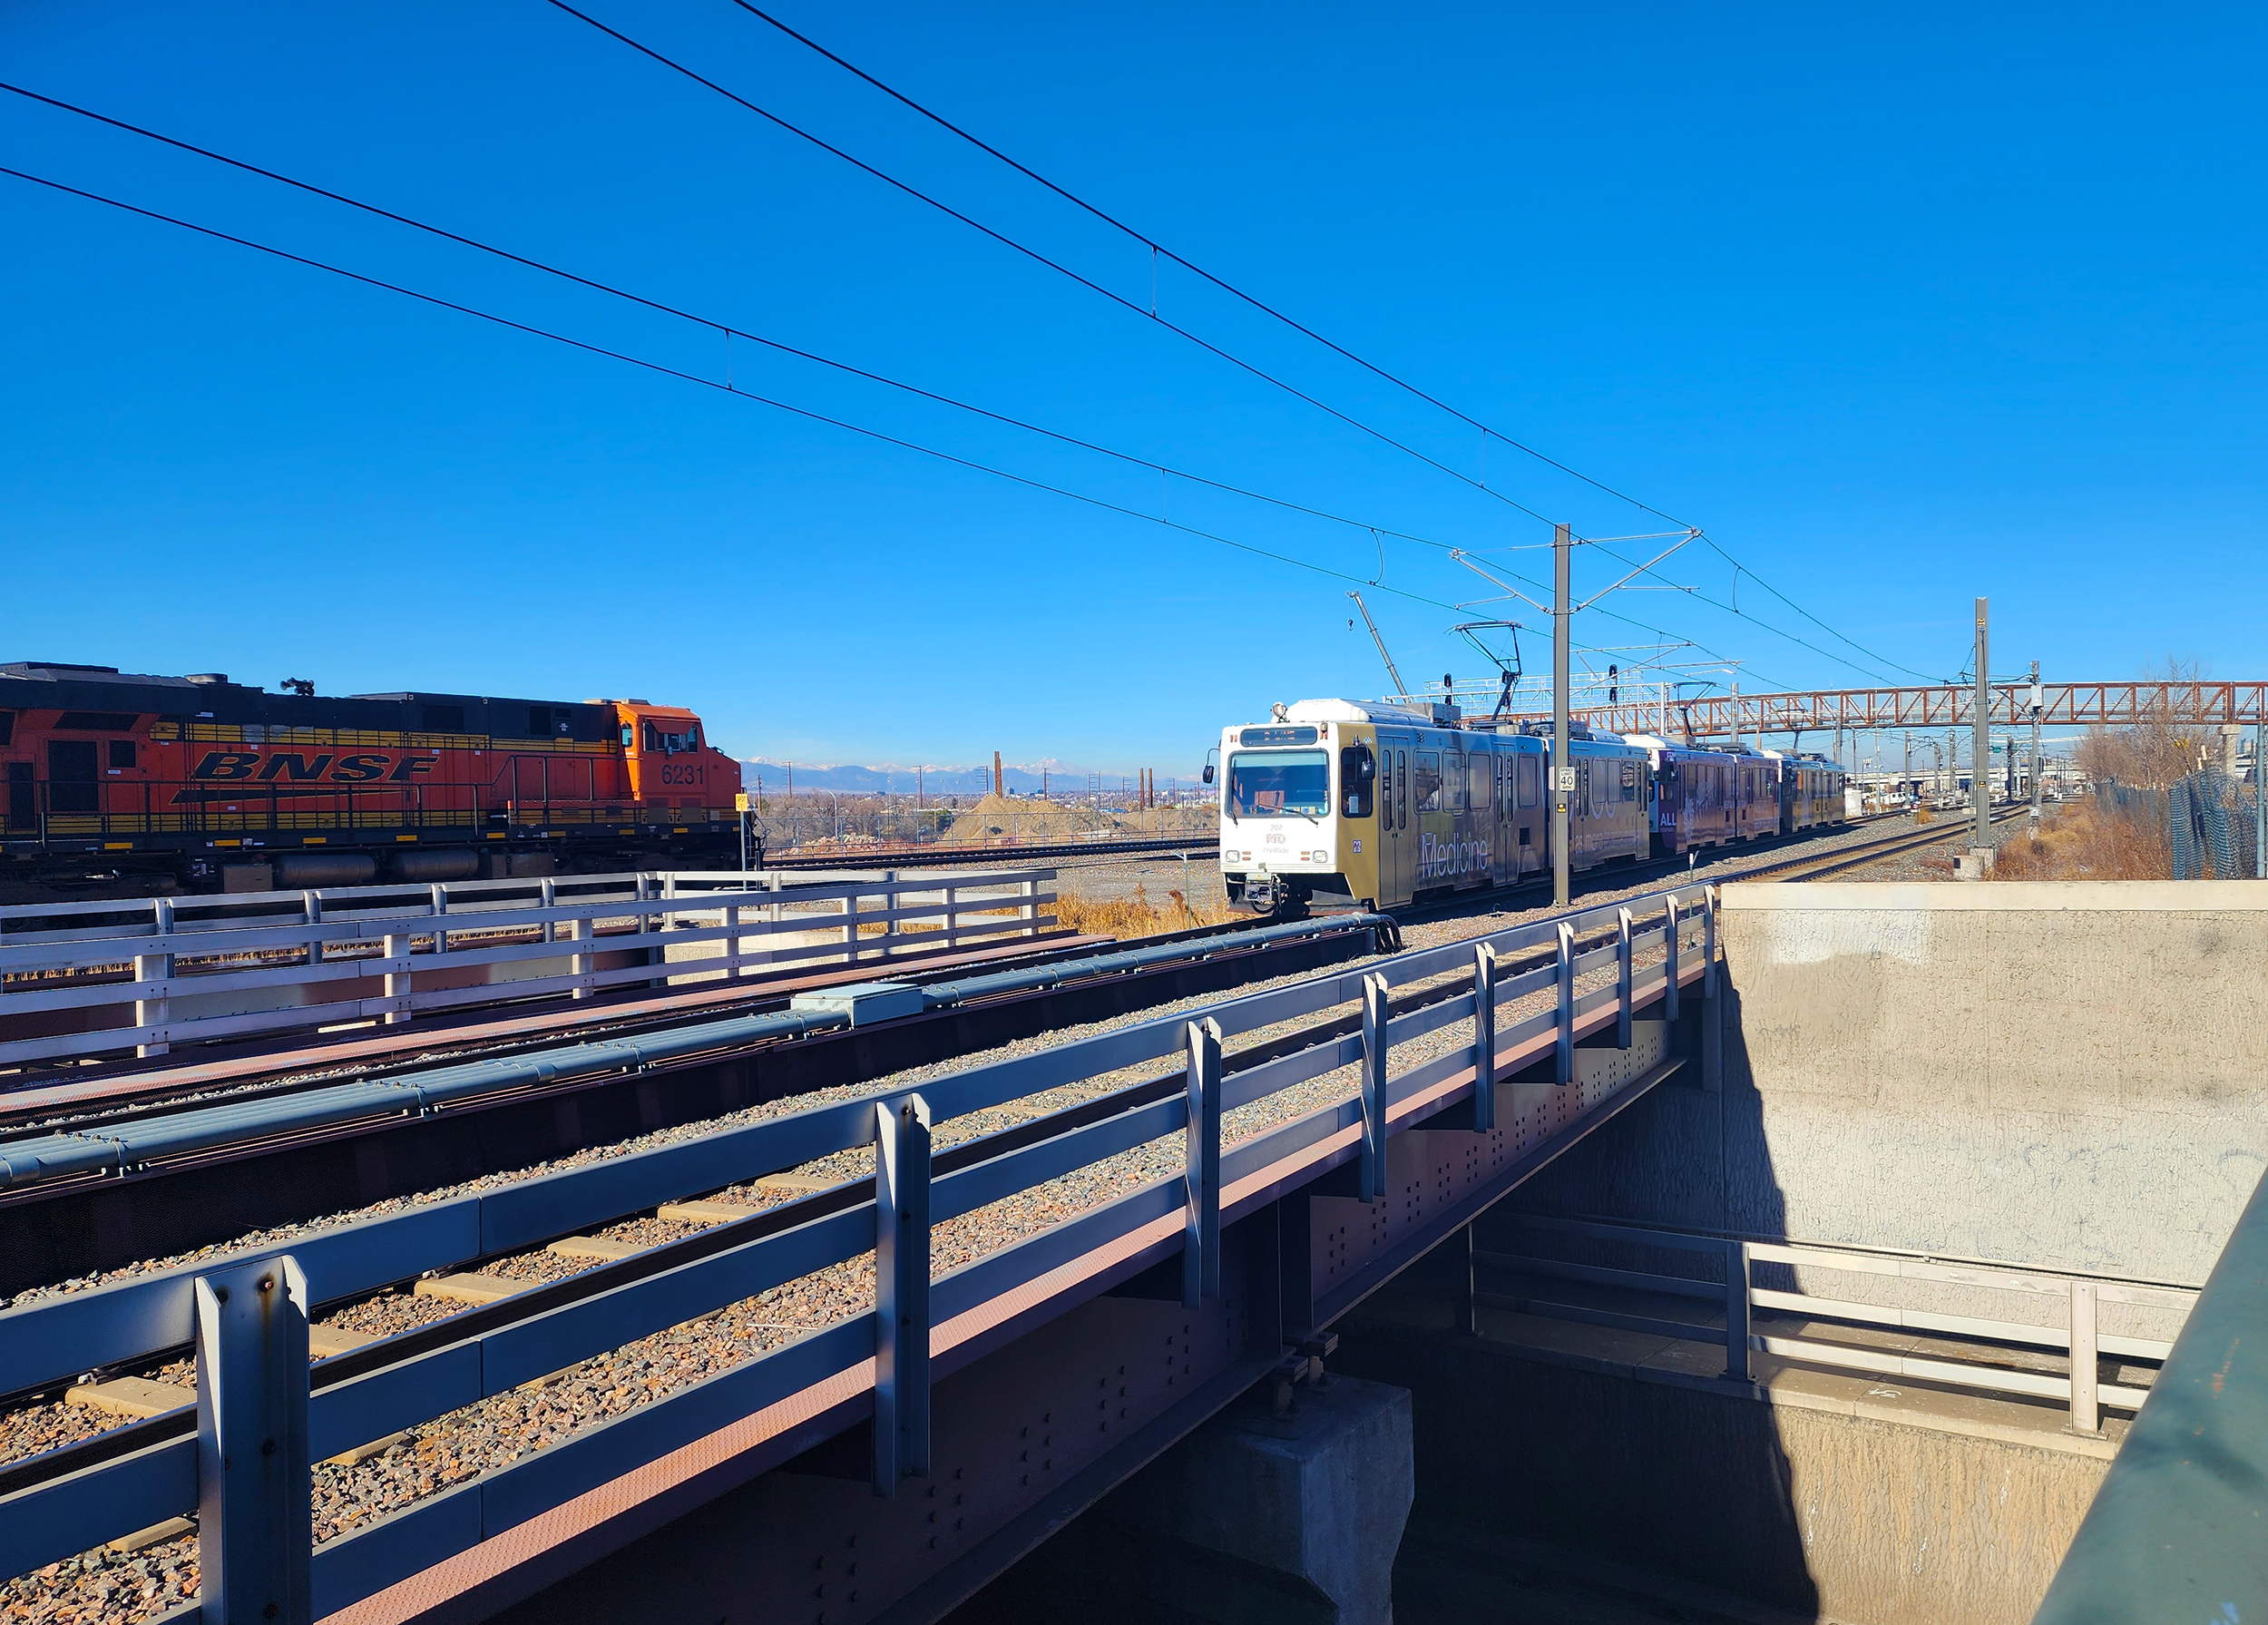 BNSF and RTD trains in Colorado